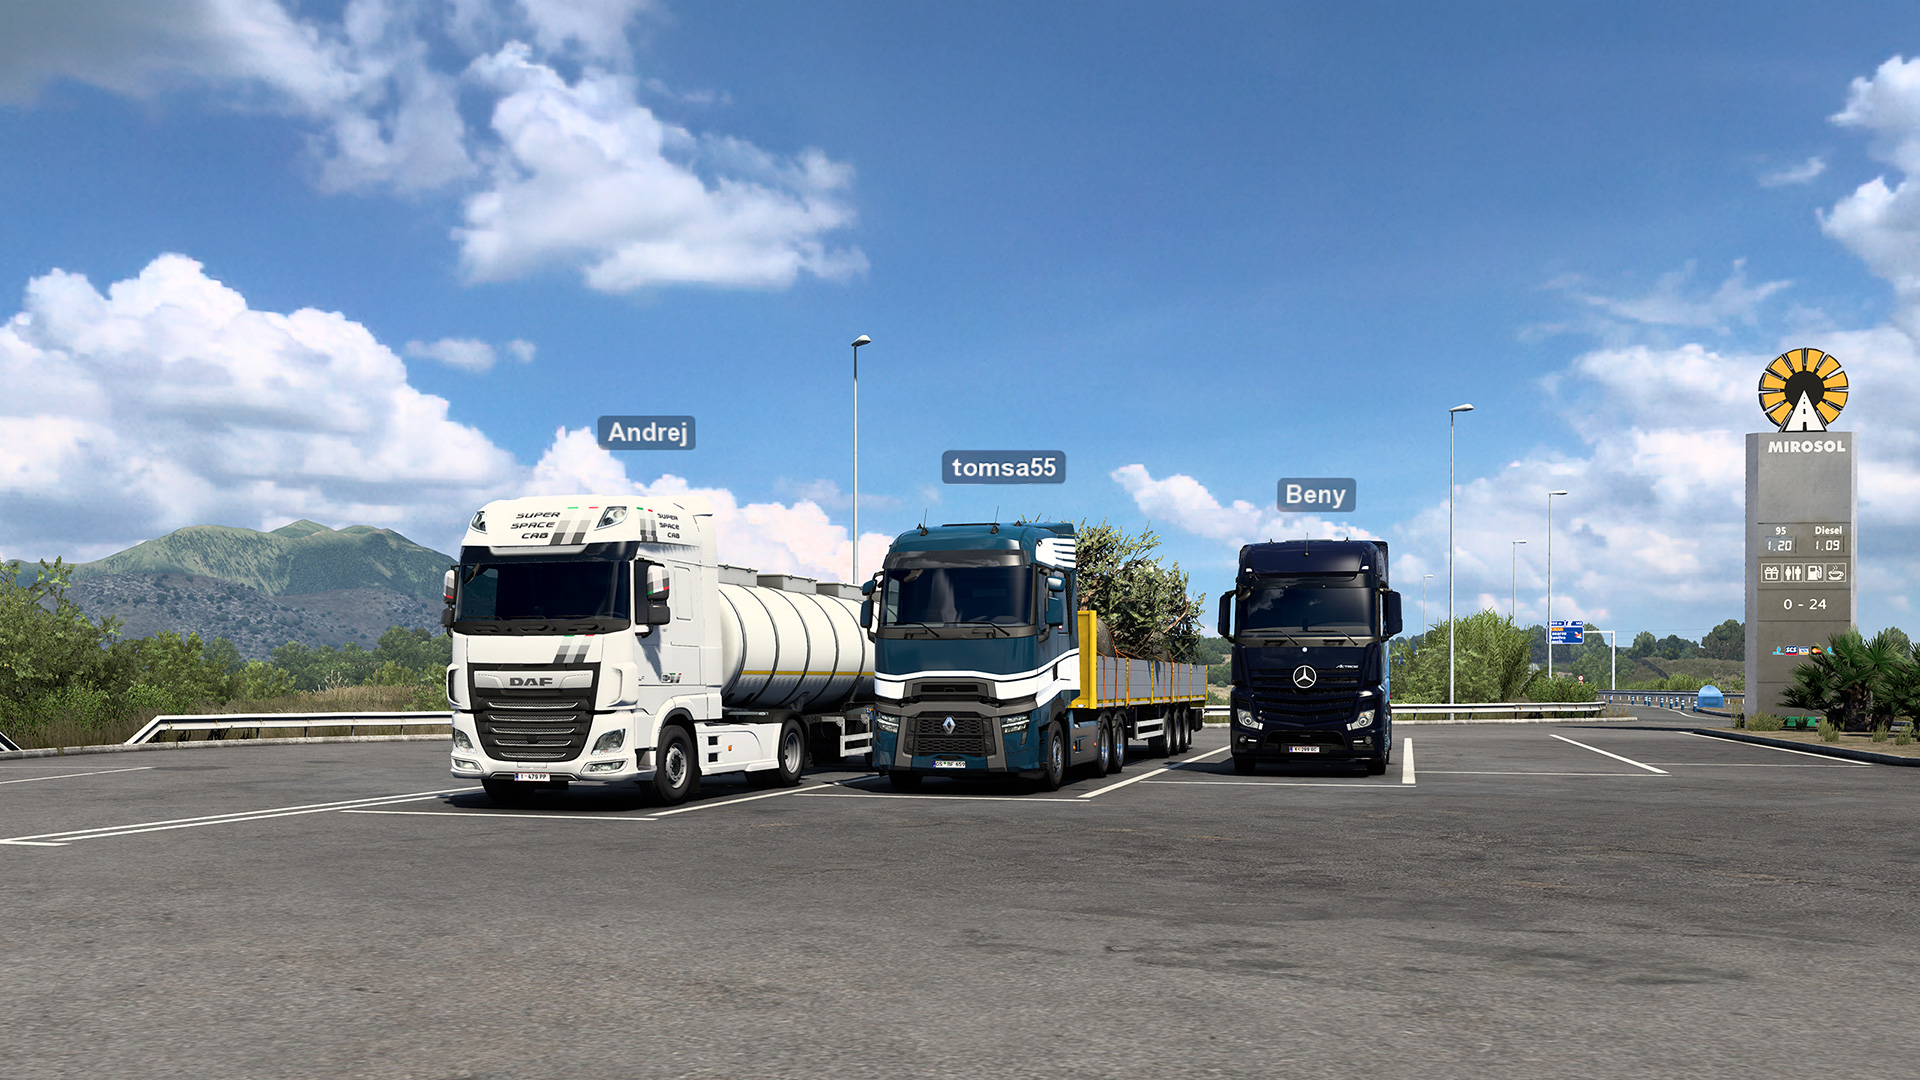 Buy Euro Truck Simulator 2 - Game of The Year (PC) game Online